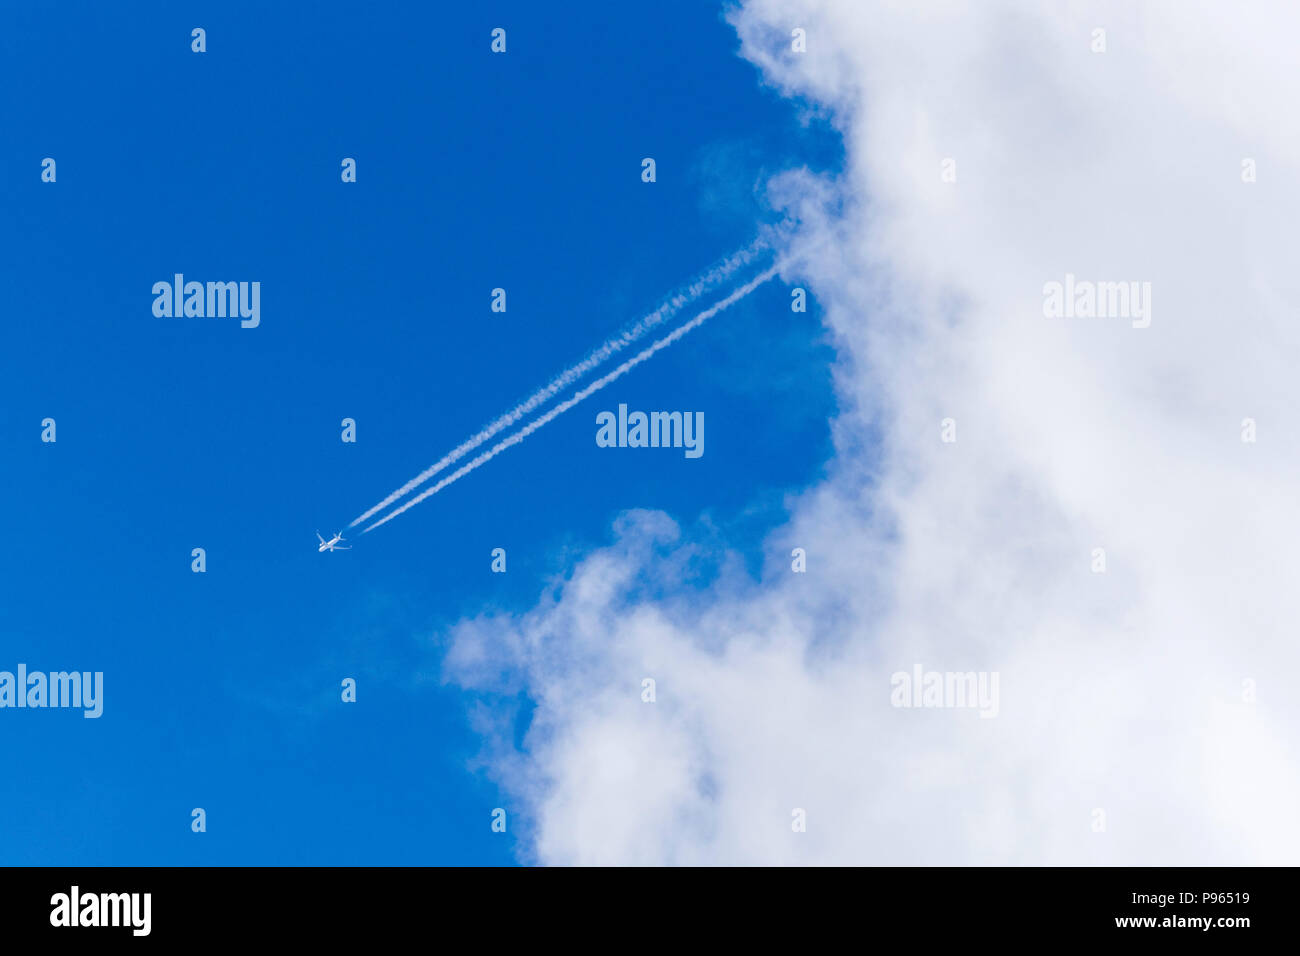 Jet vapour trail in blue sky with white clouds Stock Photo